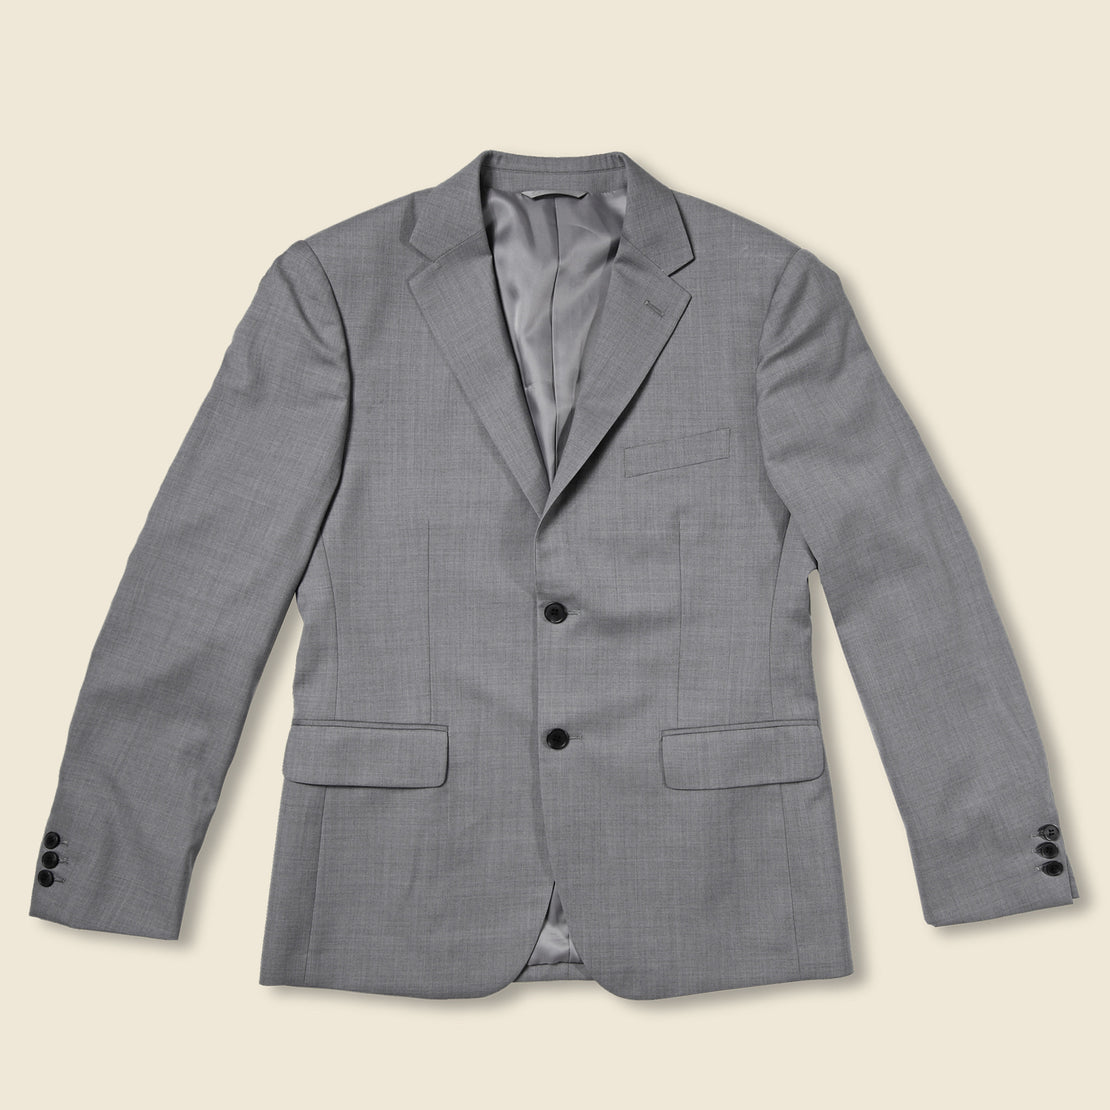 General Assembly Suit Jacket - Grey